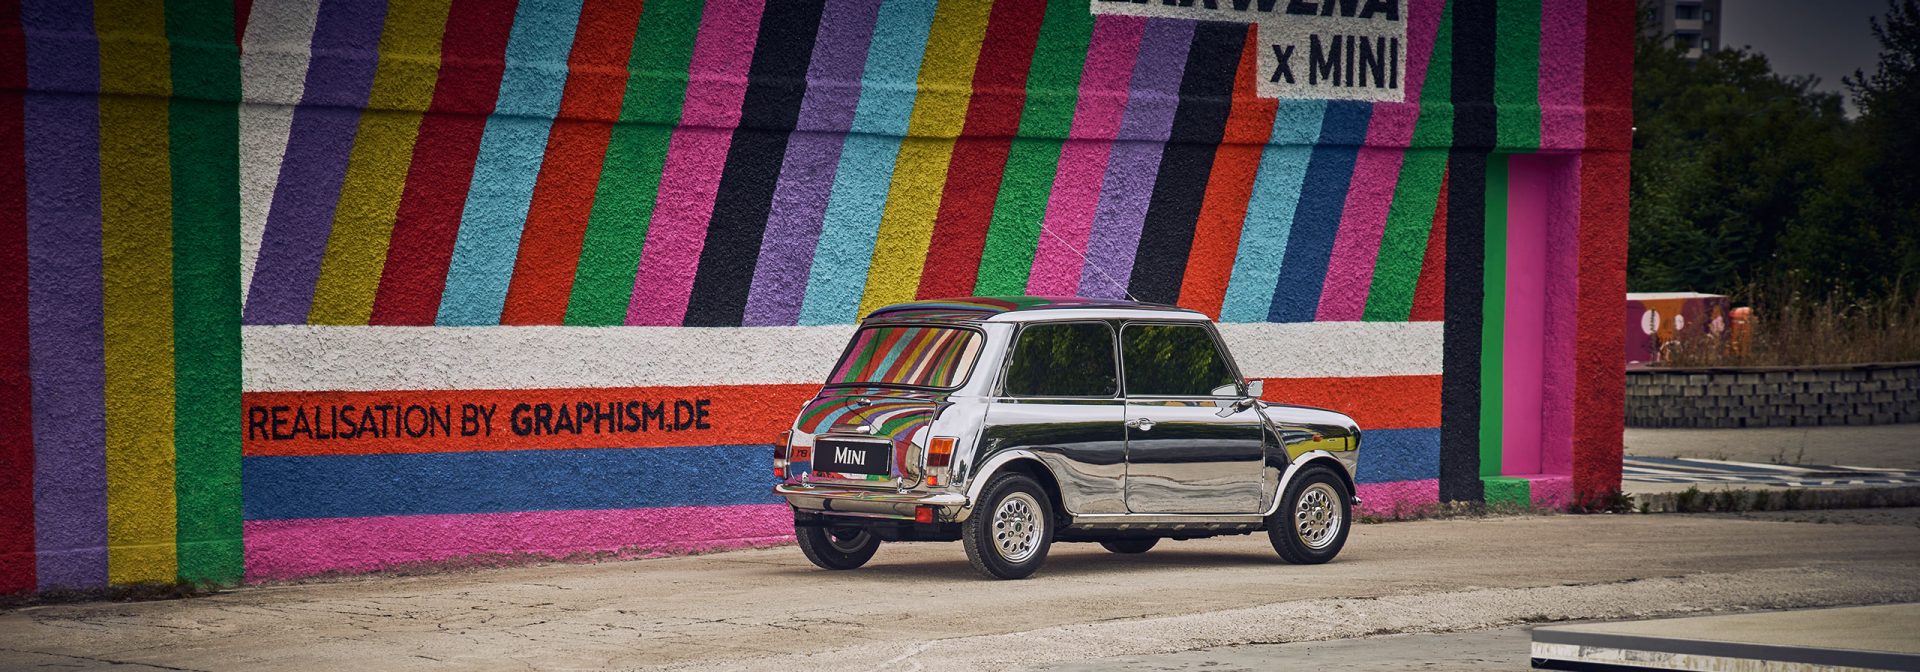 historic, silver MINI standing in front of a colorful striped wall